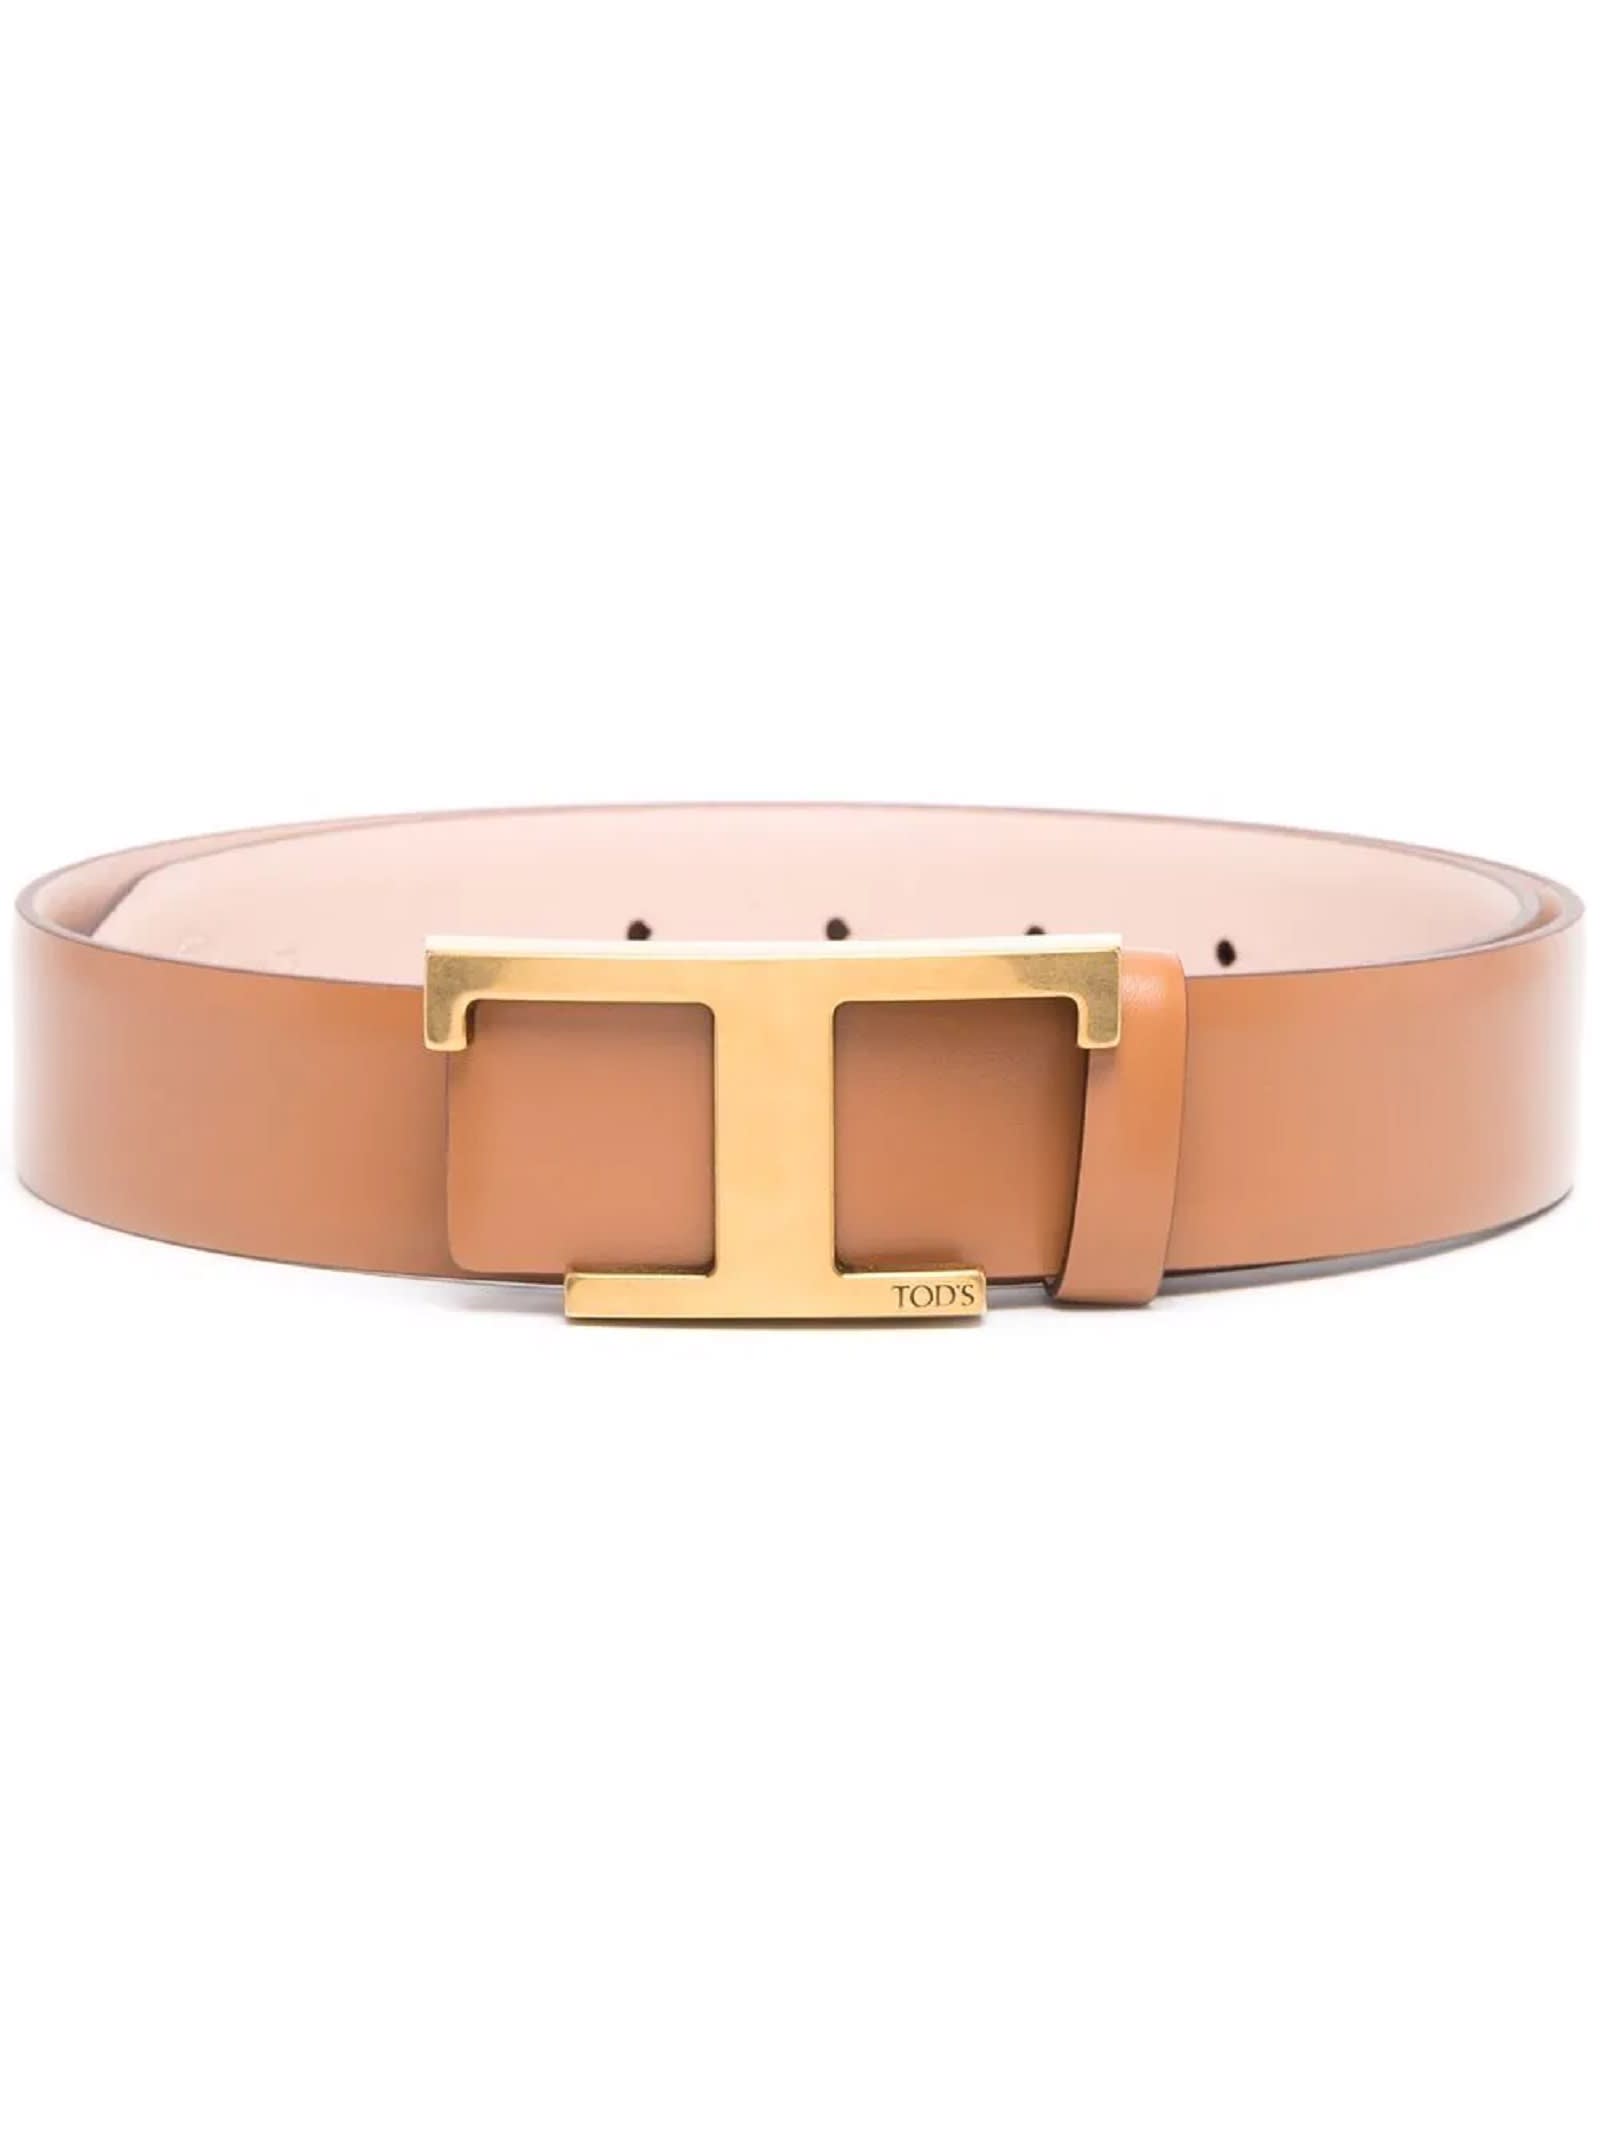 Tods Brown Smooth Leather Belt